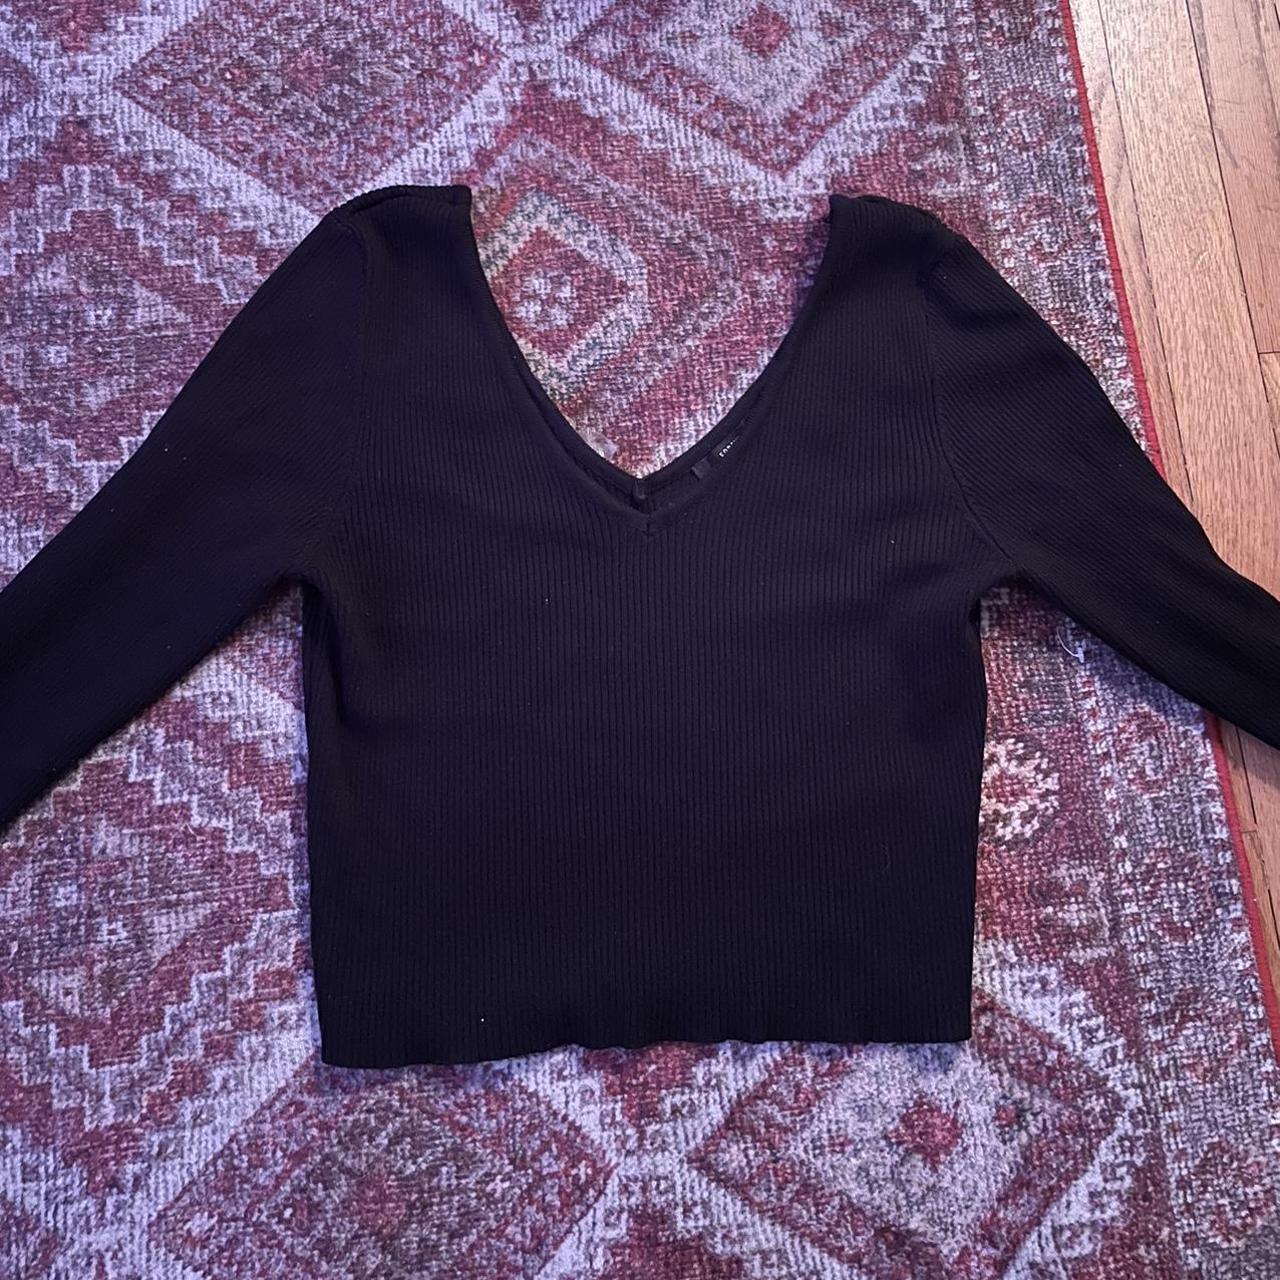 Black cropped sweater material long sleeve SIZE:... - Depop